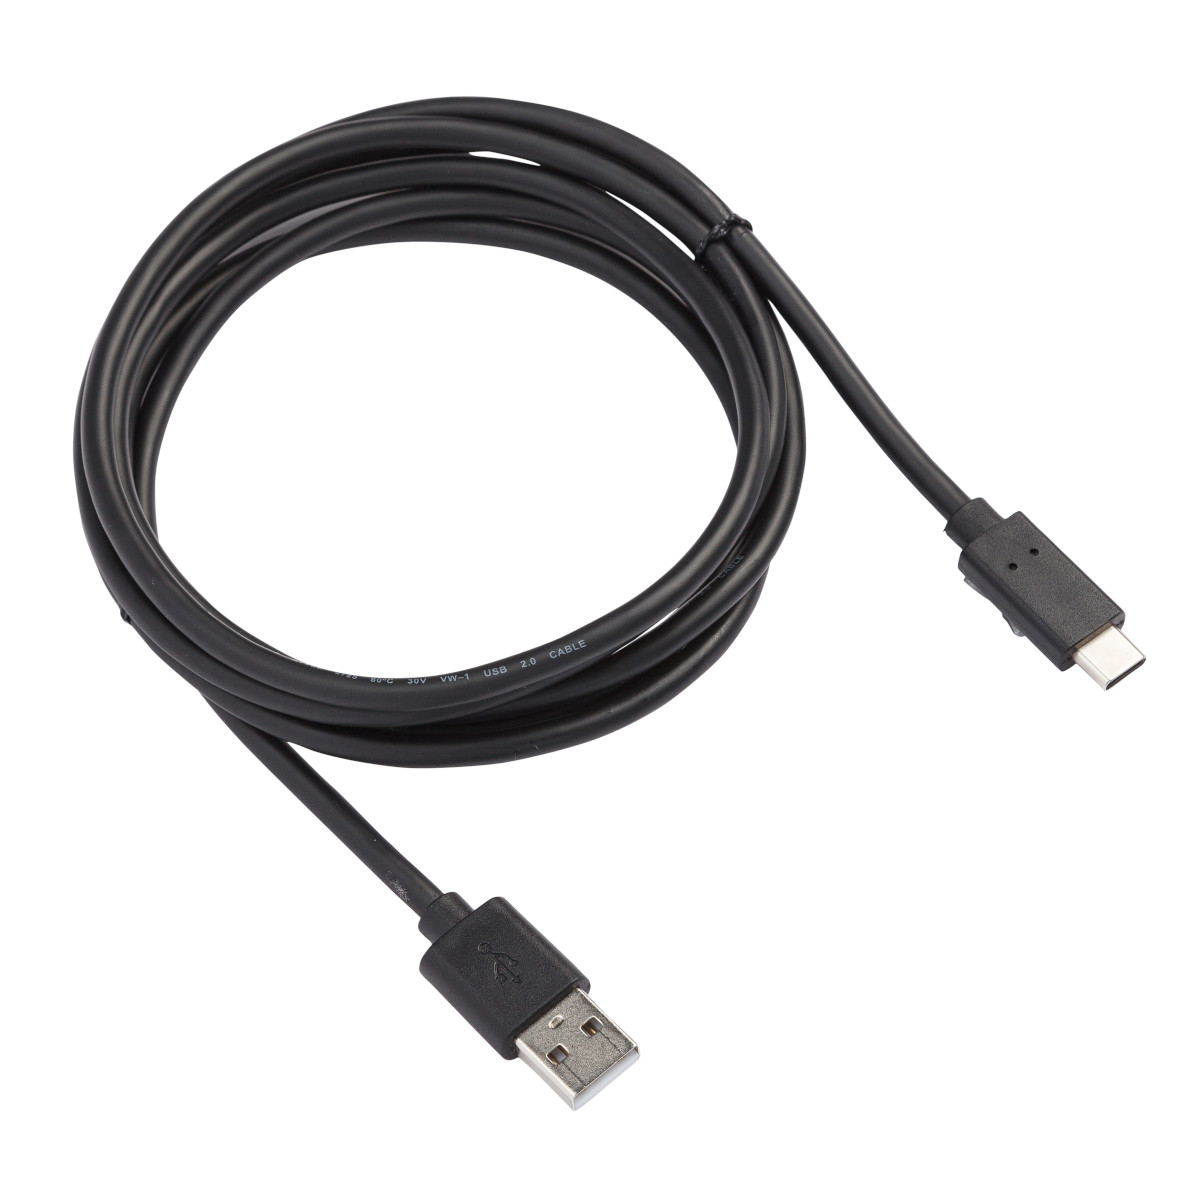 USB-C to USB Type A Cord